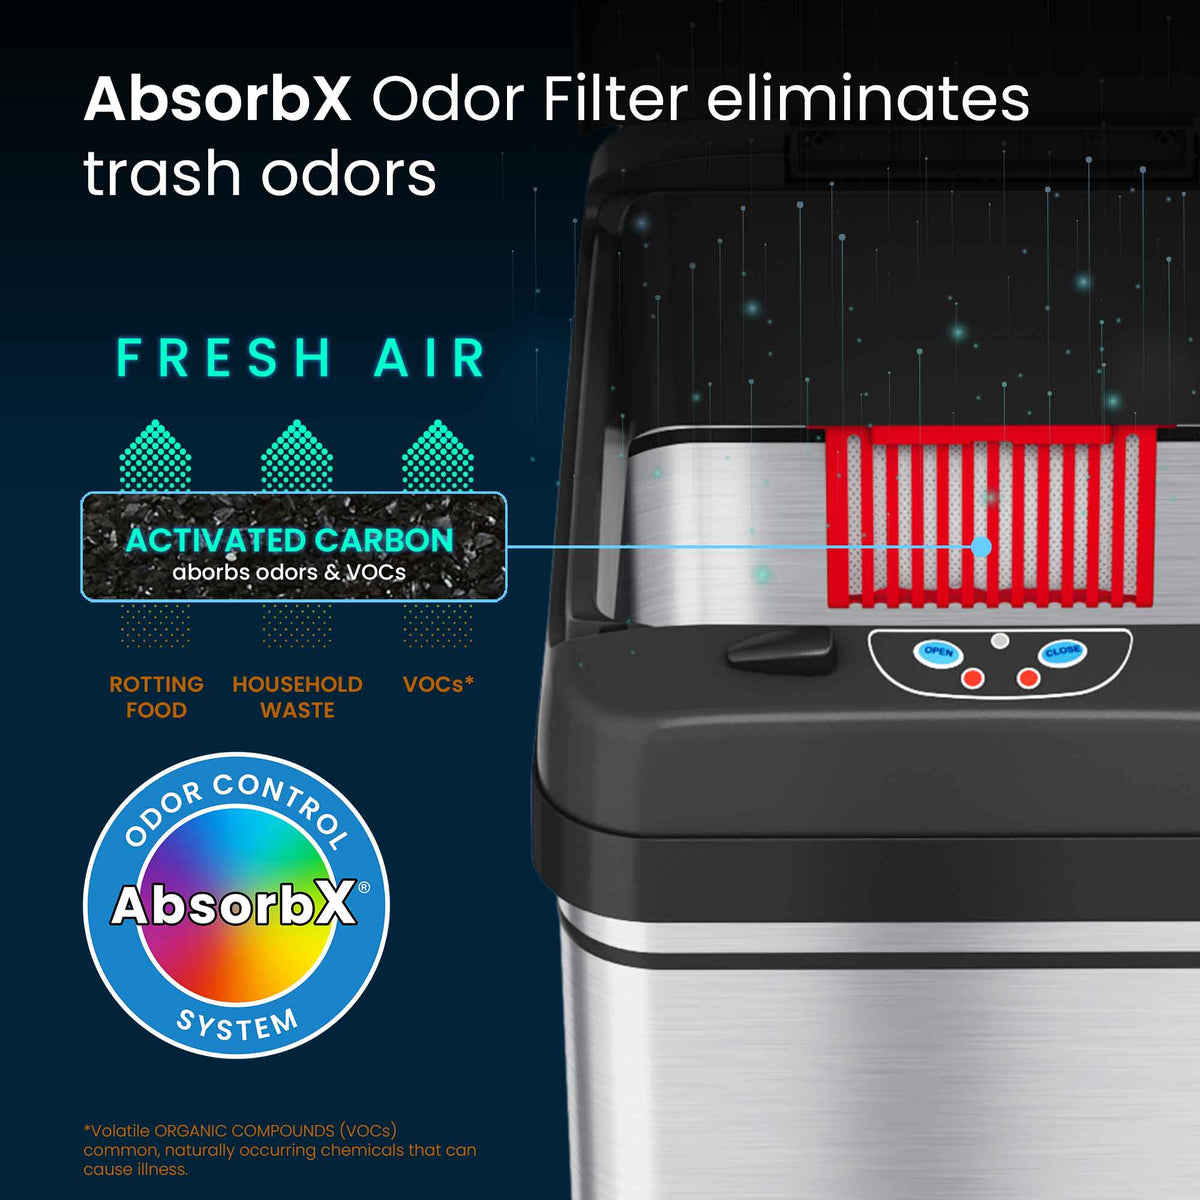 iTouchless DZT13P Touchless Sensor Trash Can with Odor Filter eliminates trash odors